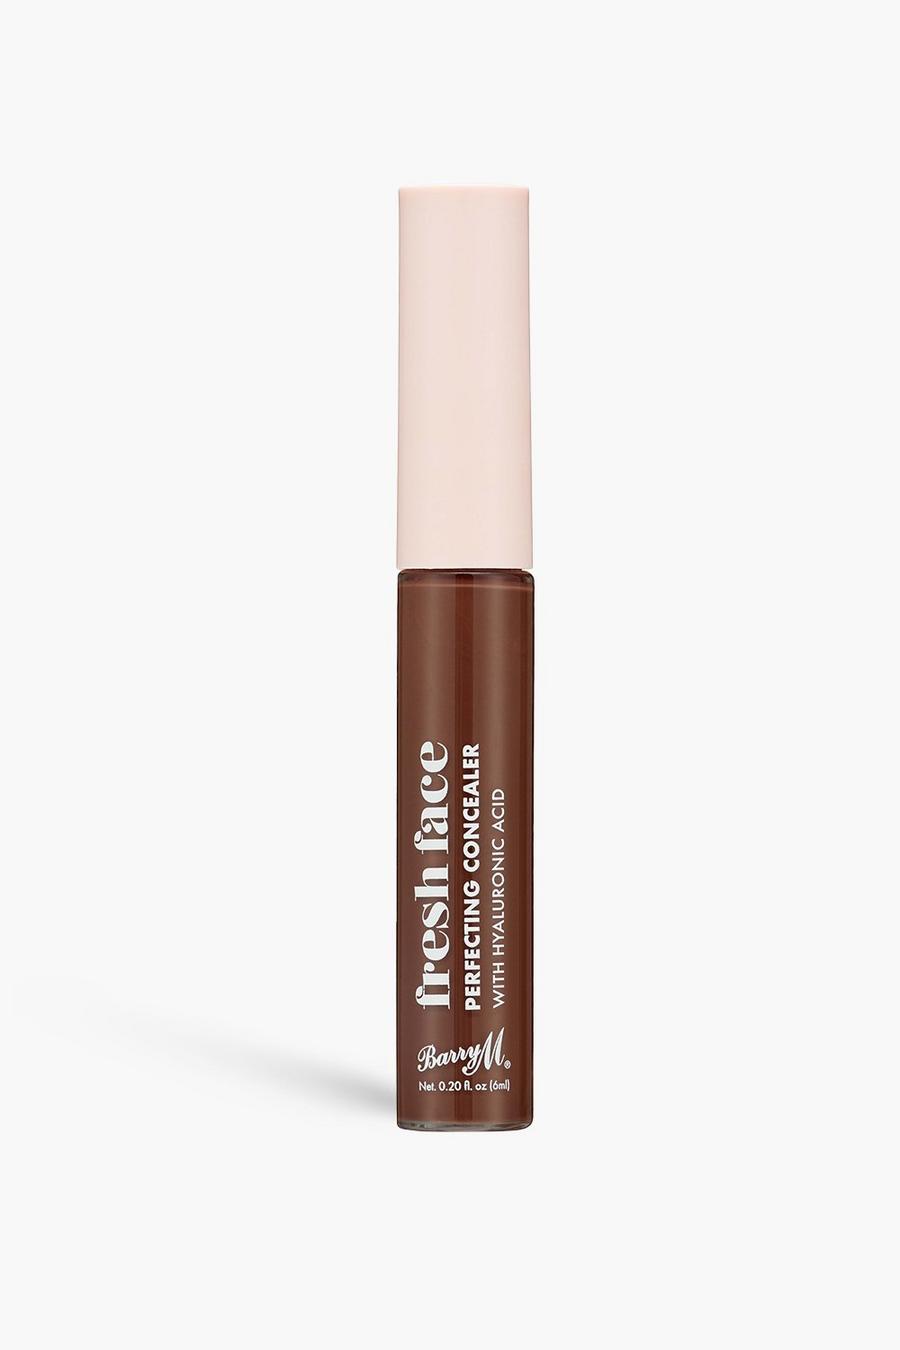 Brown Barry M Fresh Face Perfecting Concealer 20